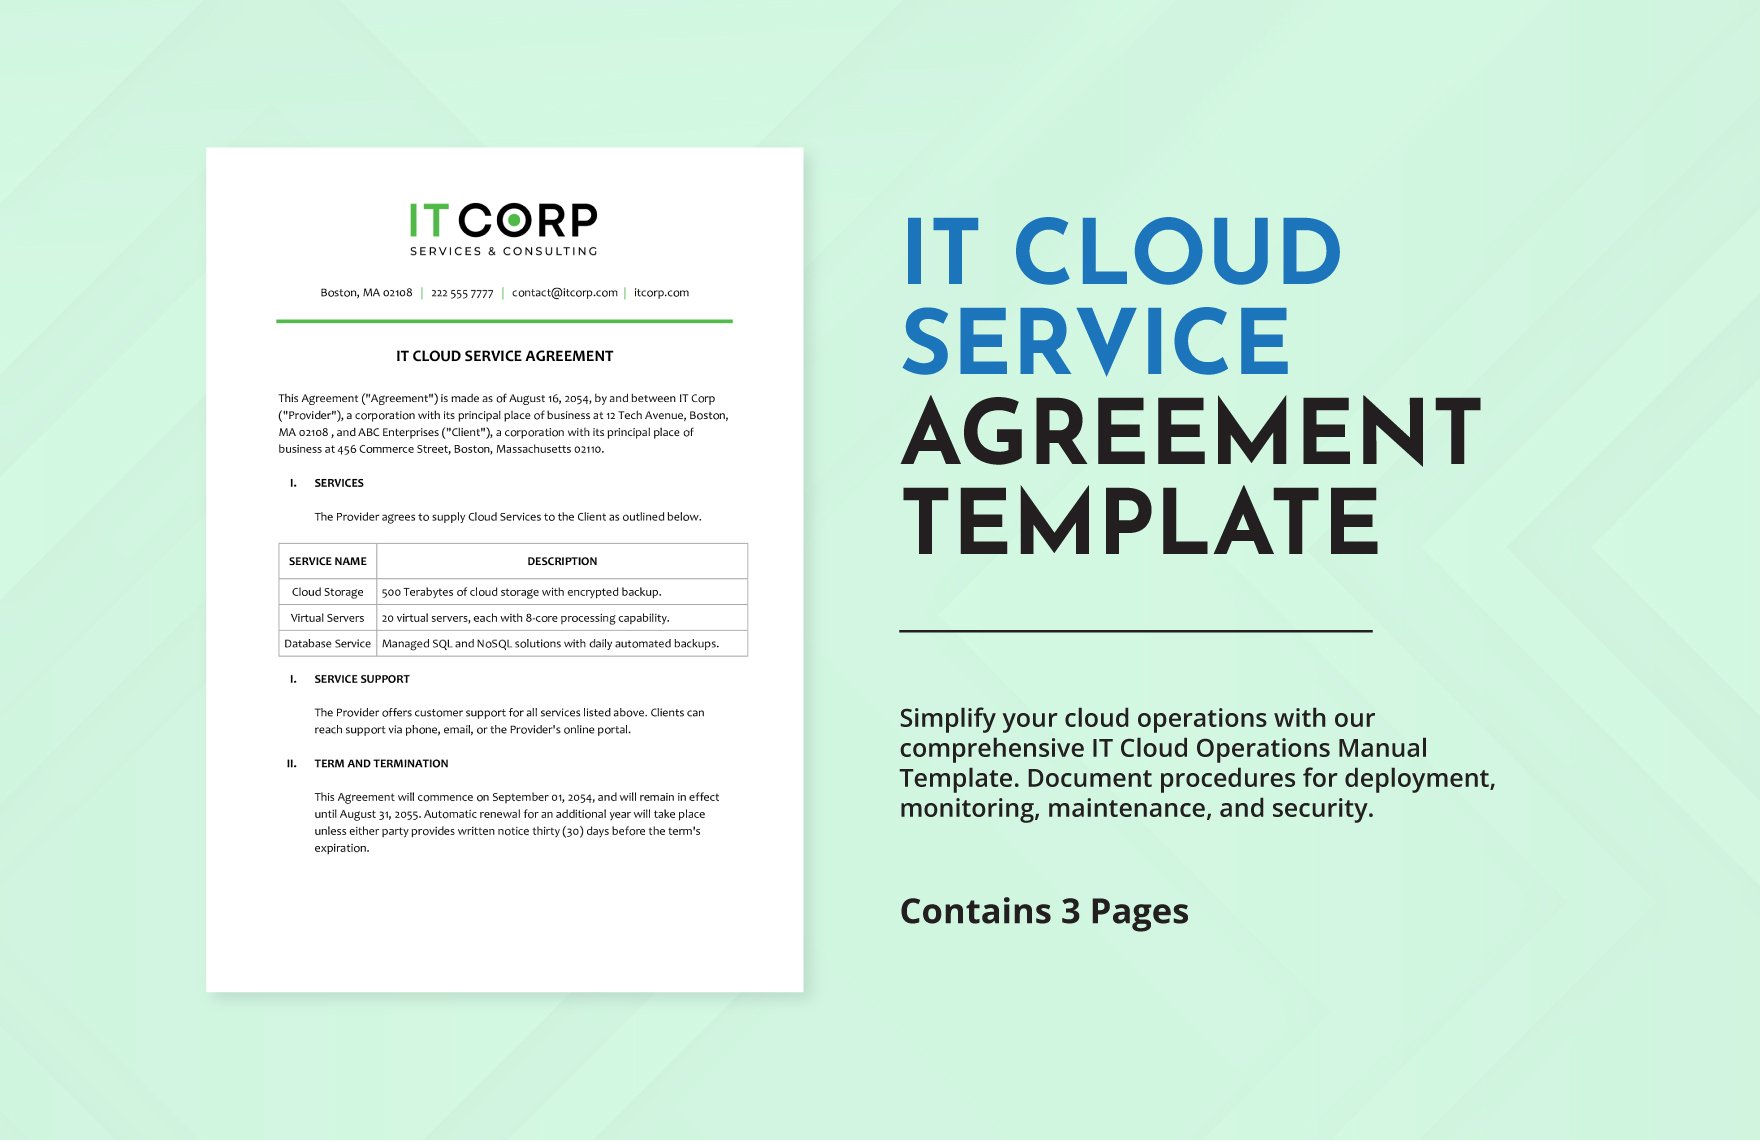 IT Cloud Service Agreement Template in Word, Google Docs, PDF